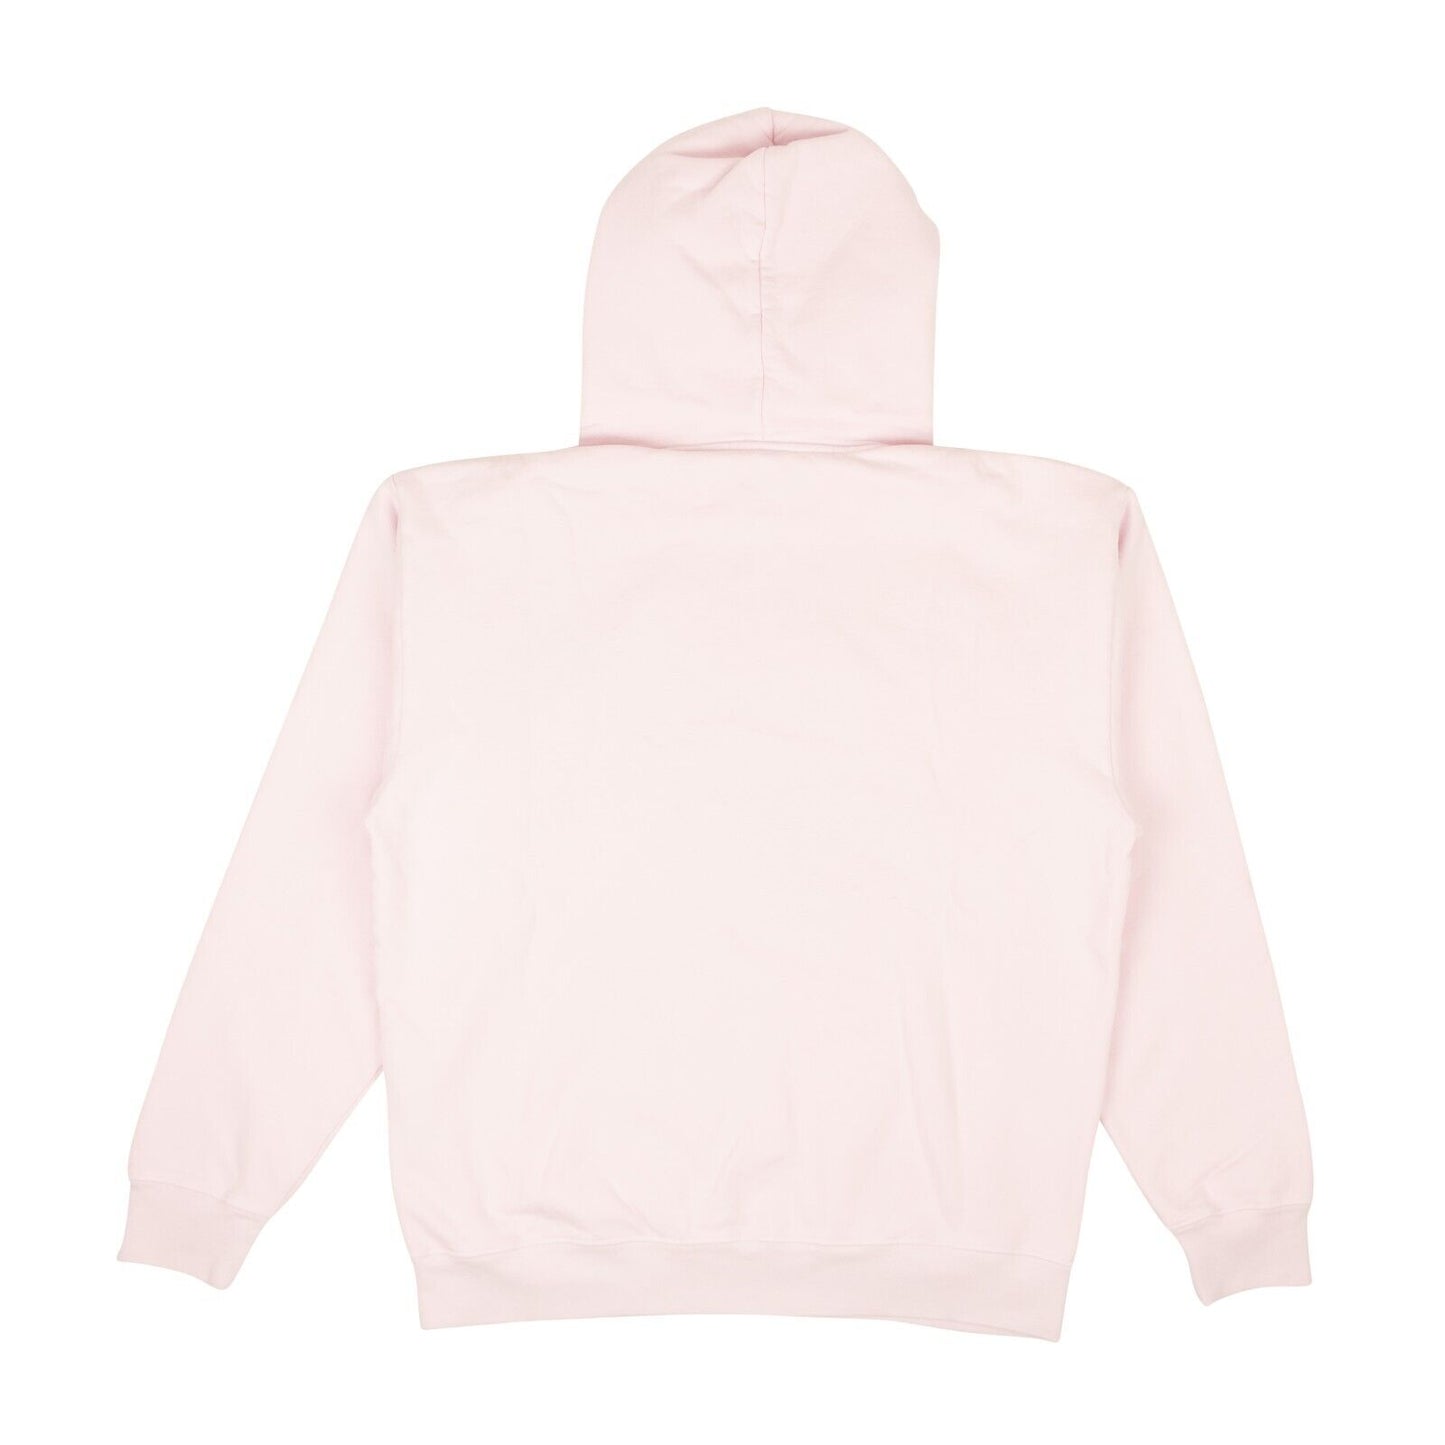 Complexcon X Verdy Hoodie - Pink